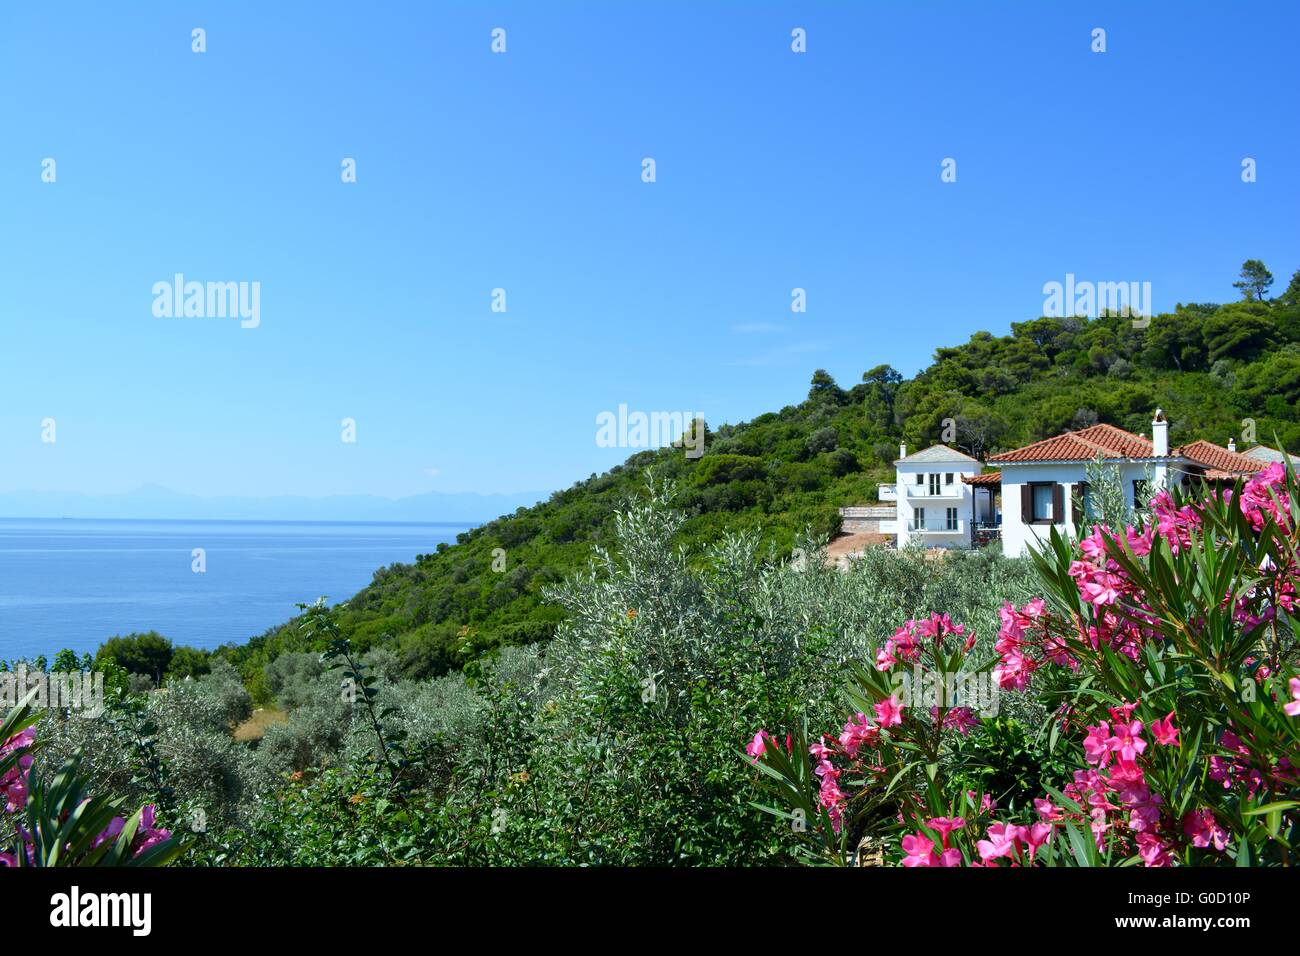 View of a villa on a hillside on the island of Skopelos, Greece Stock Photo